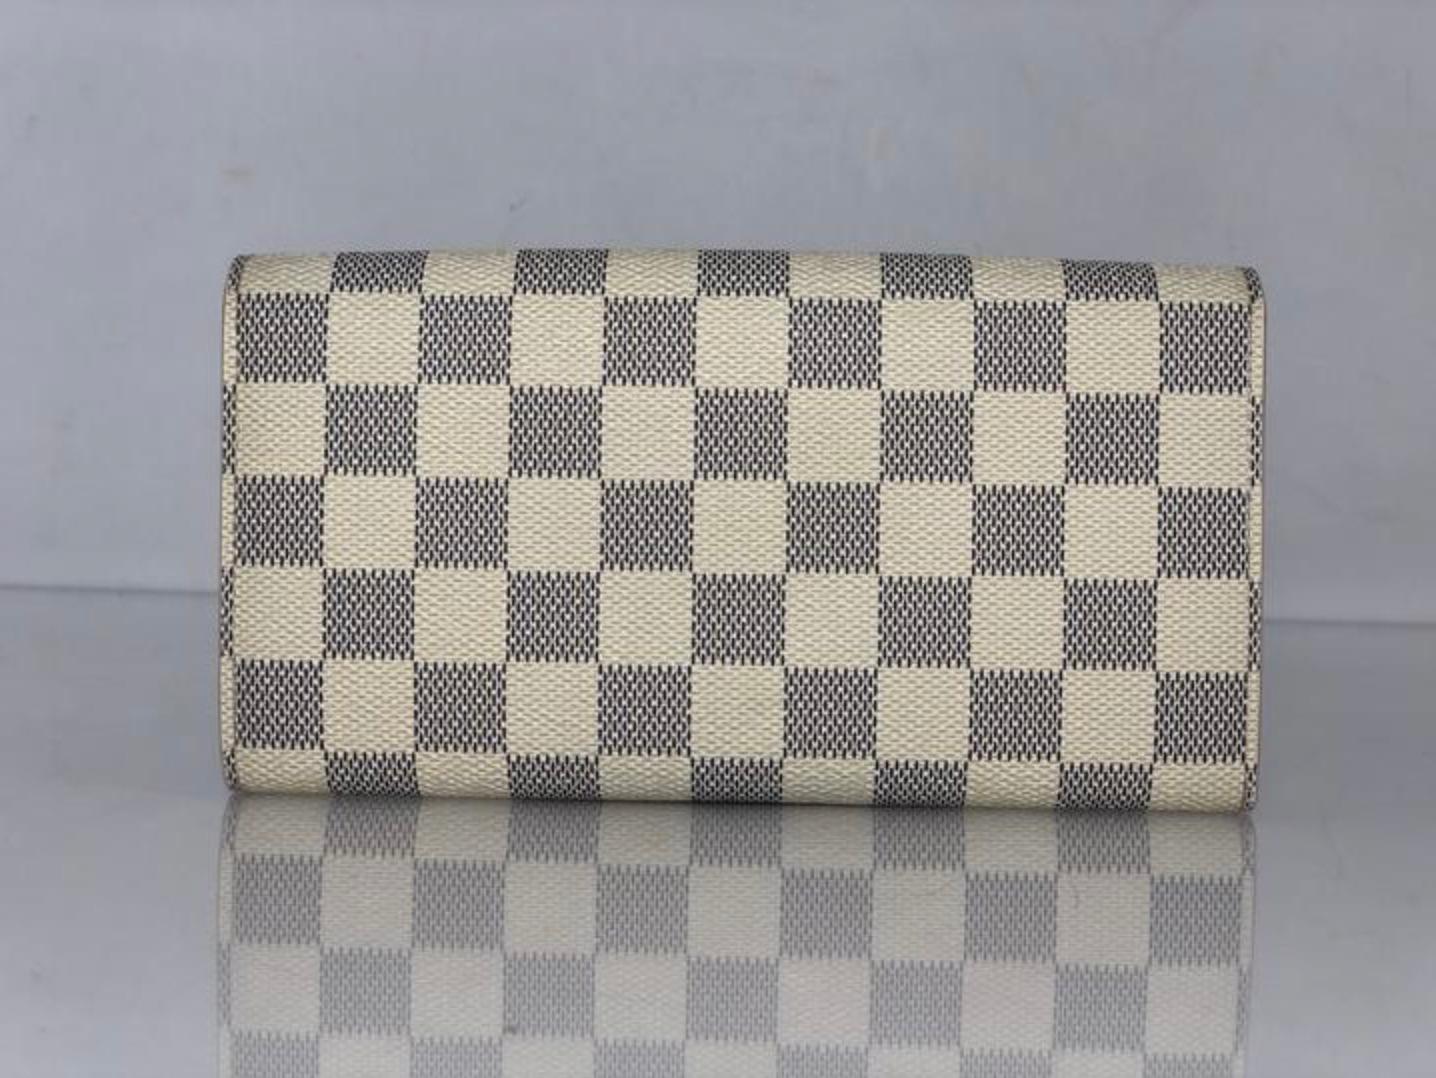  Louis Vuitton Damier Azur Sarah Wallet In Good Condition For Sale In Saint Charles, IL